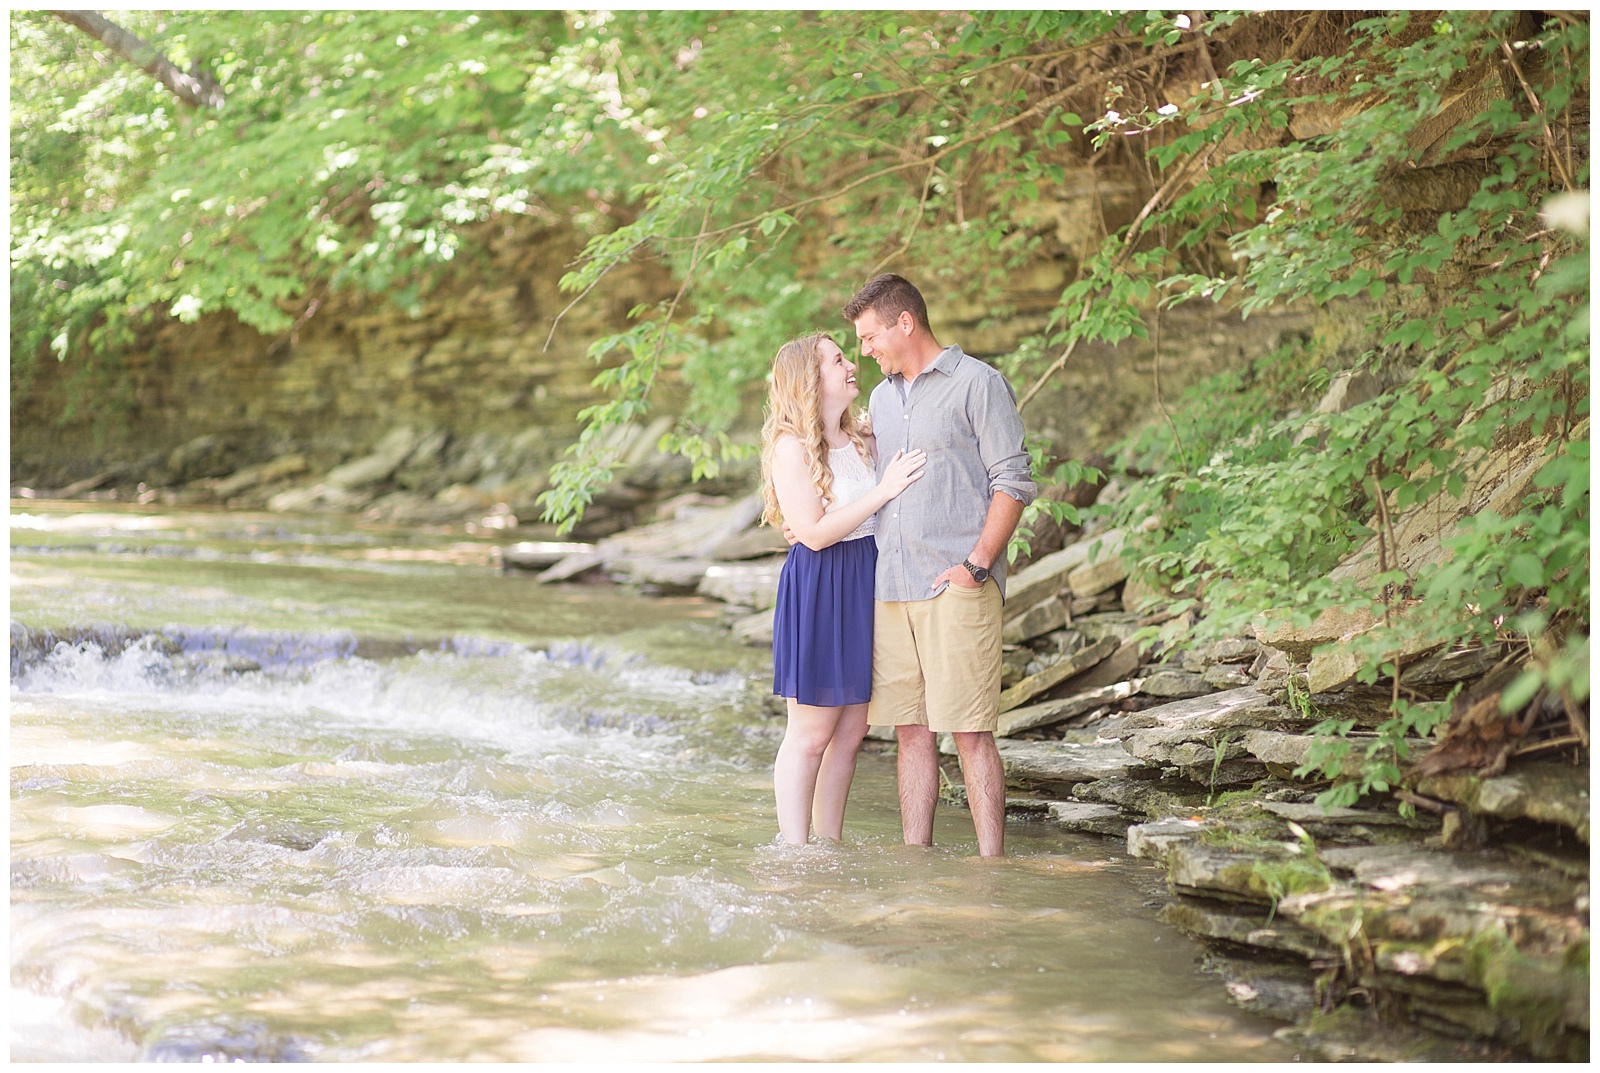 Outdoor Engagement Session | Monica Brown Photography | monicabrownphoto.com